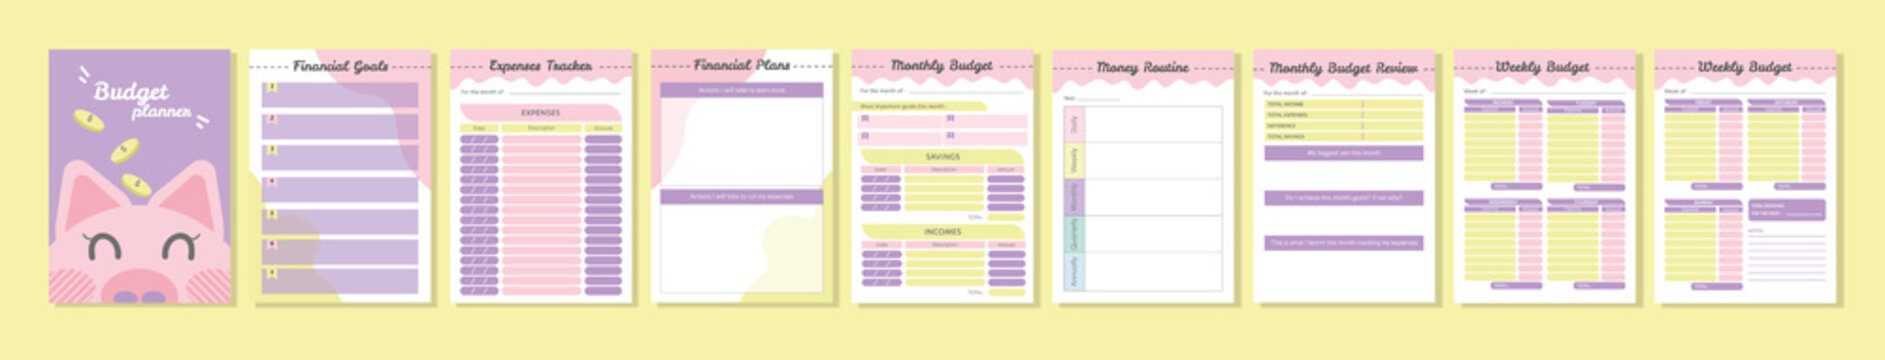 Printable minimalist budget planner template.Set of Budget Planner.Monthly Budget Planner.Weekly Budget Planner.Financial Goals planner.Expenses tracker.Monthly Budget Review